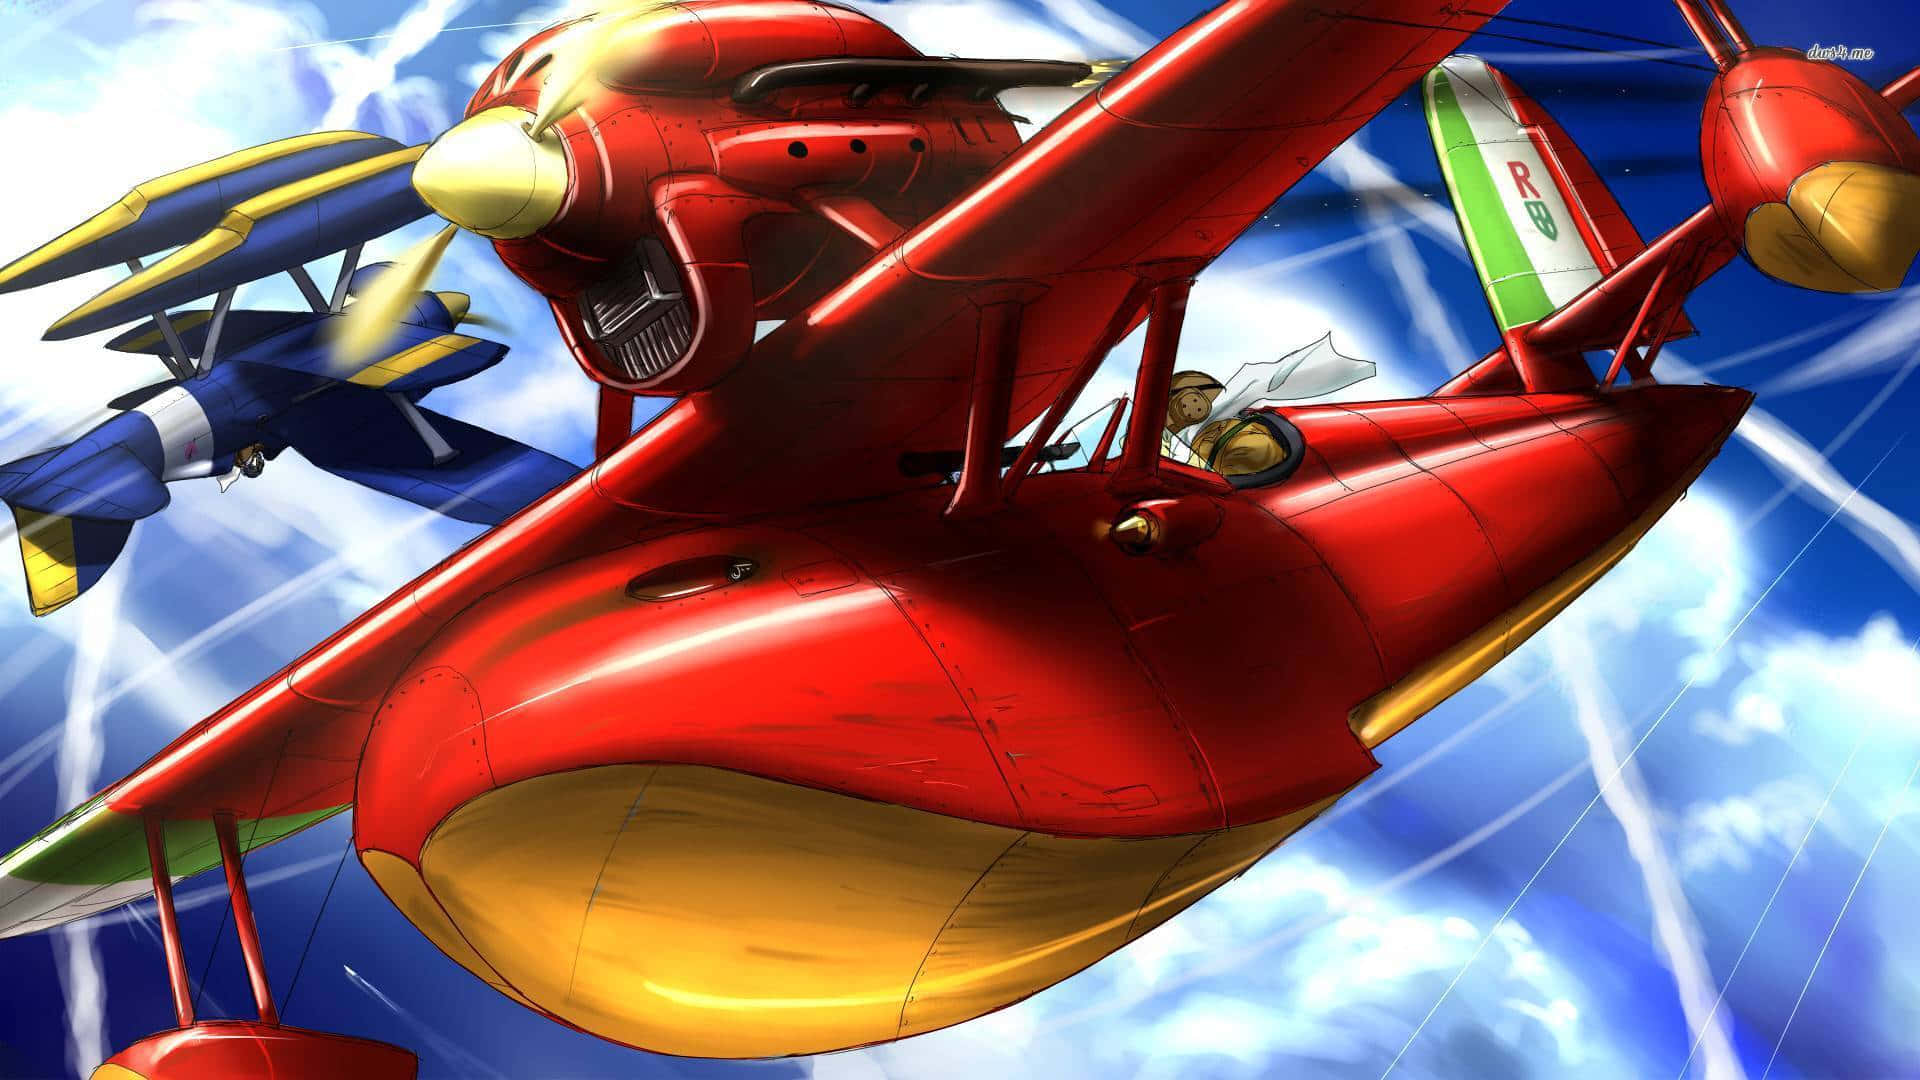 Porco Rosso soaring through the skies in his iconic red plane Wallpaper